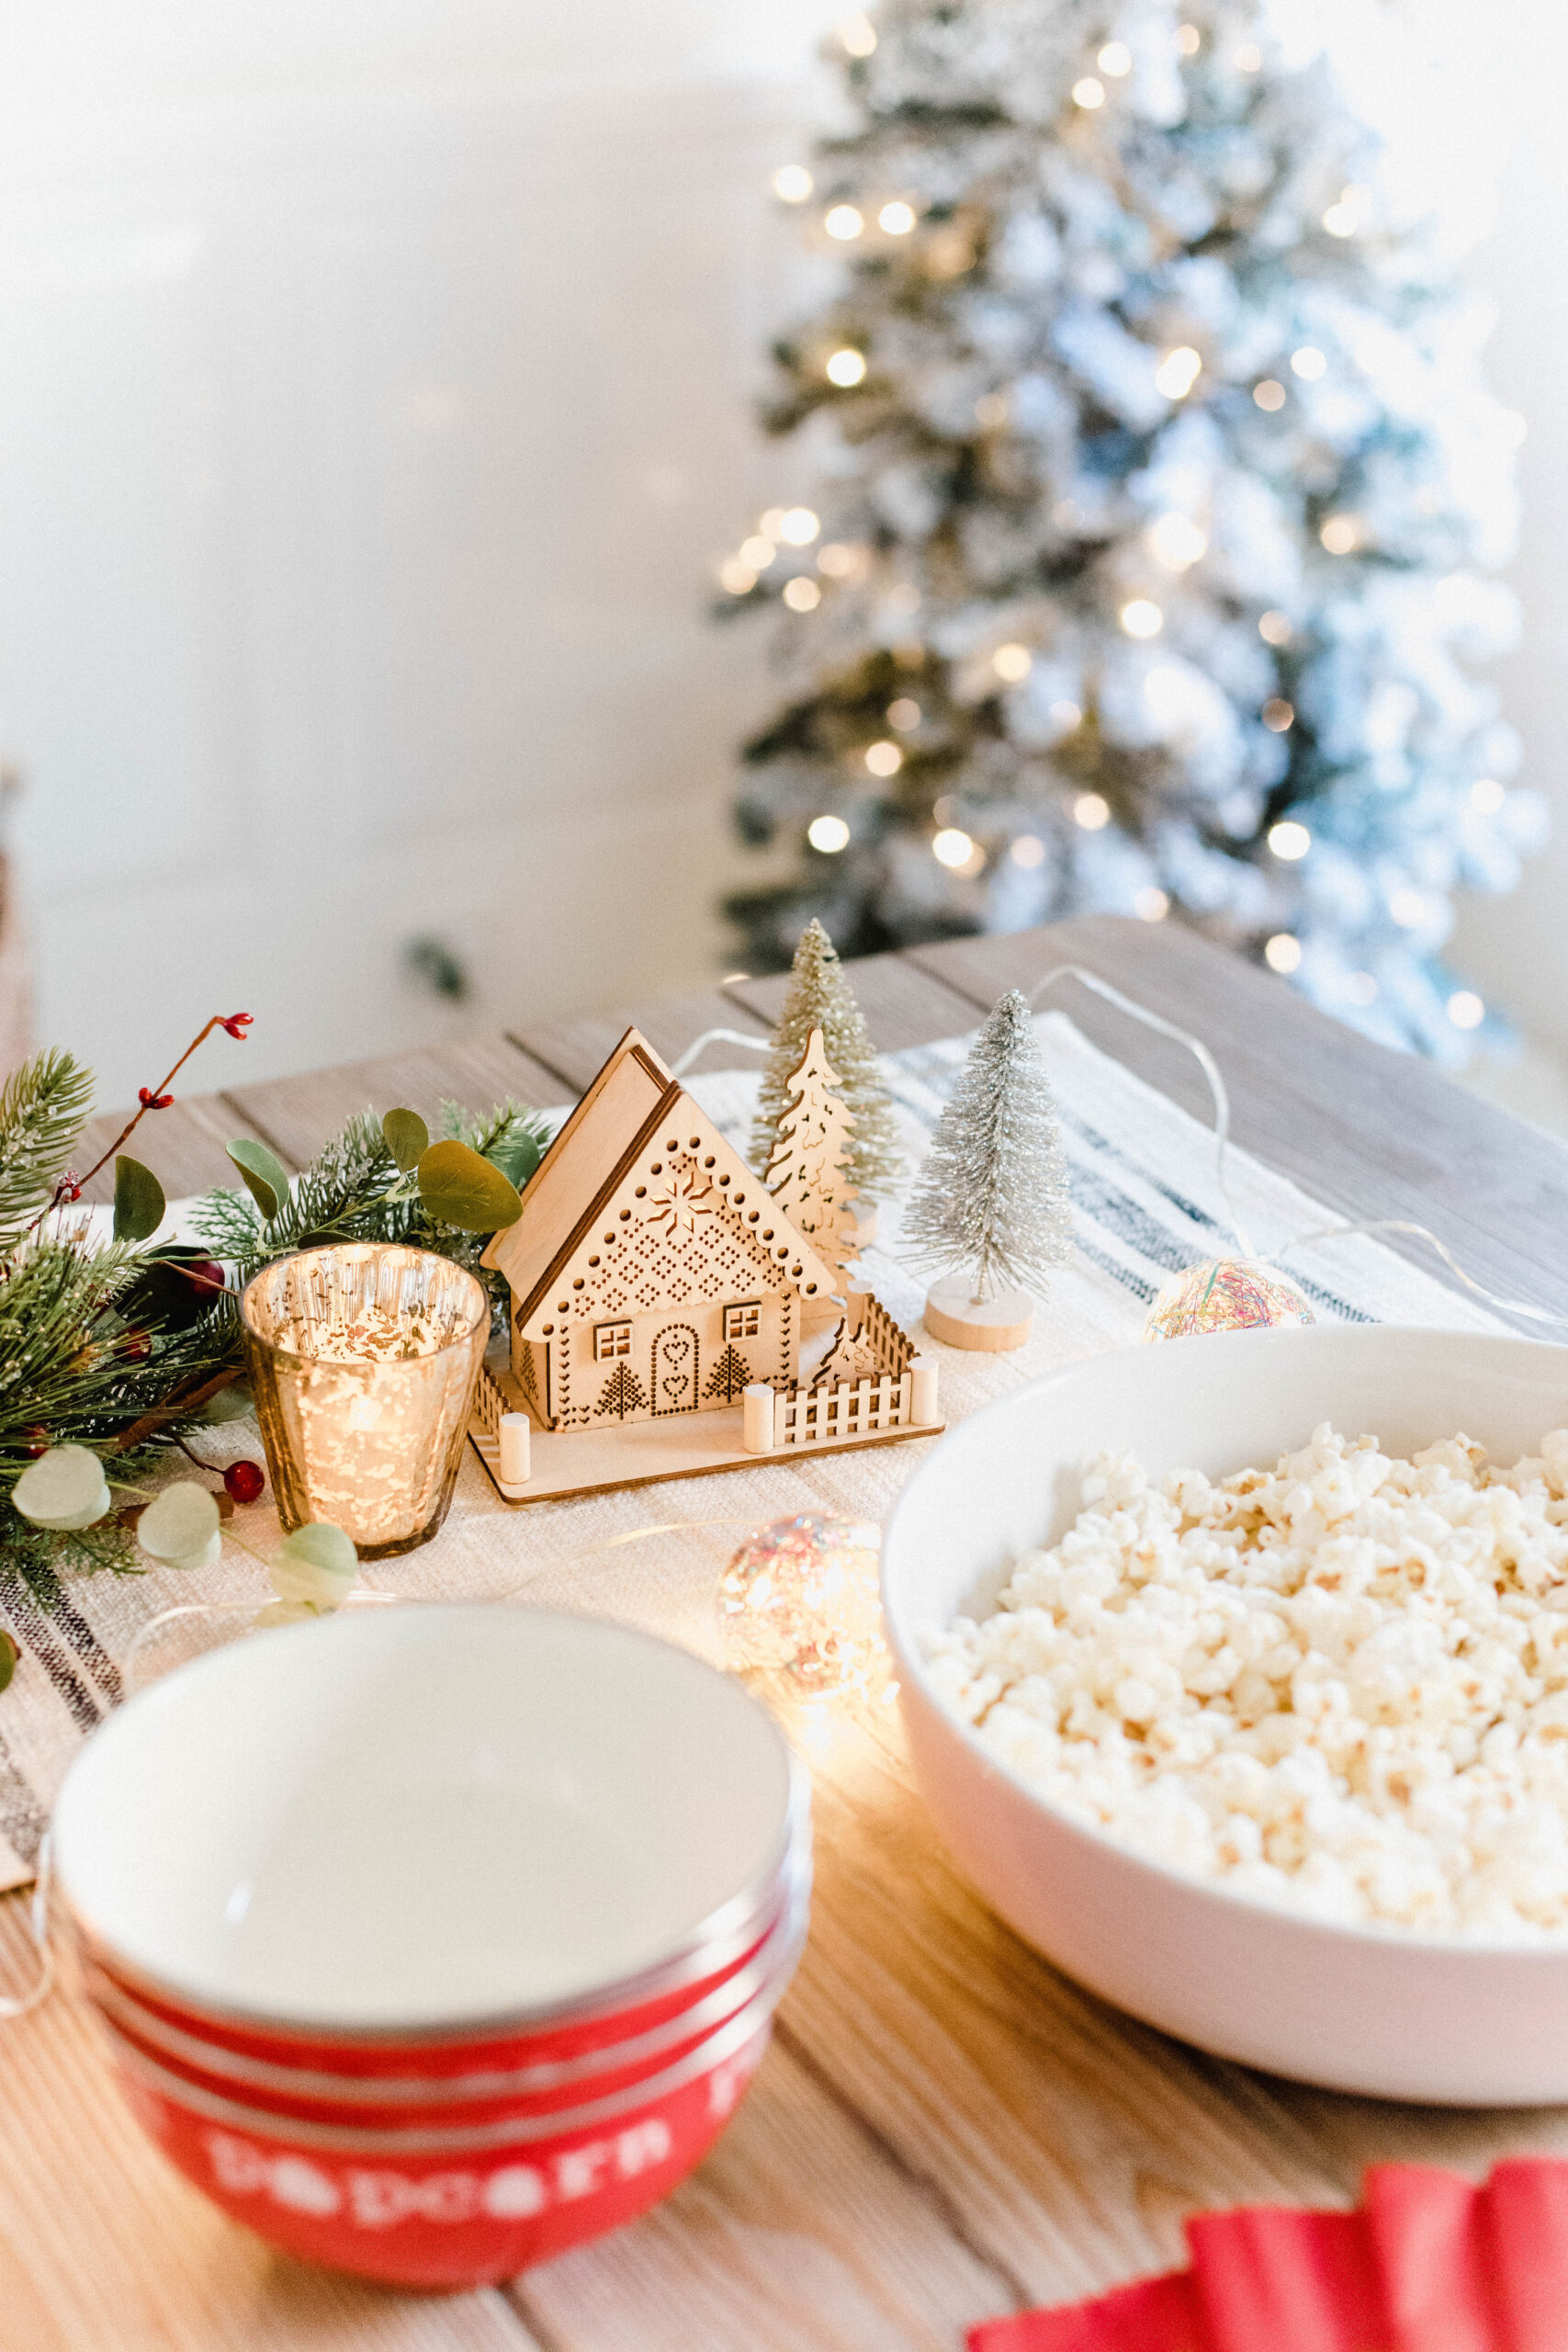 Looking for the perfect holiday hot cocoa bar? Connecticut Lifestyle blogger Lauren McBride is sharing her favorite finds for this festive holiday activity!